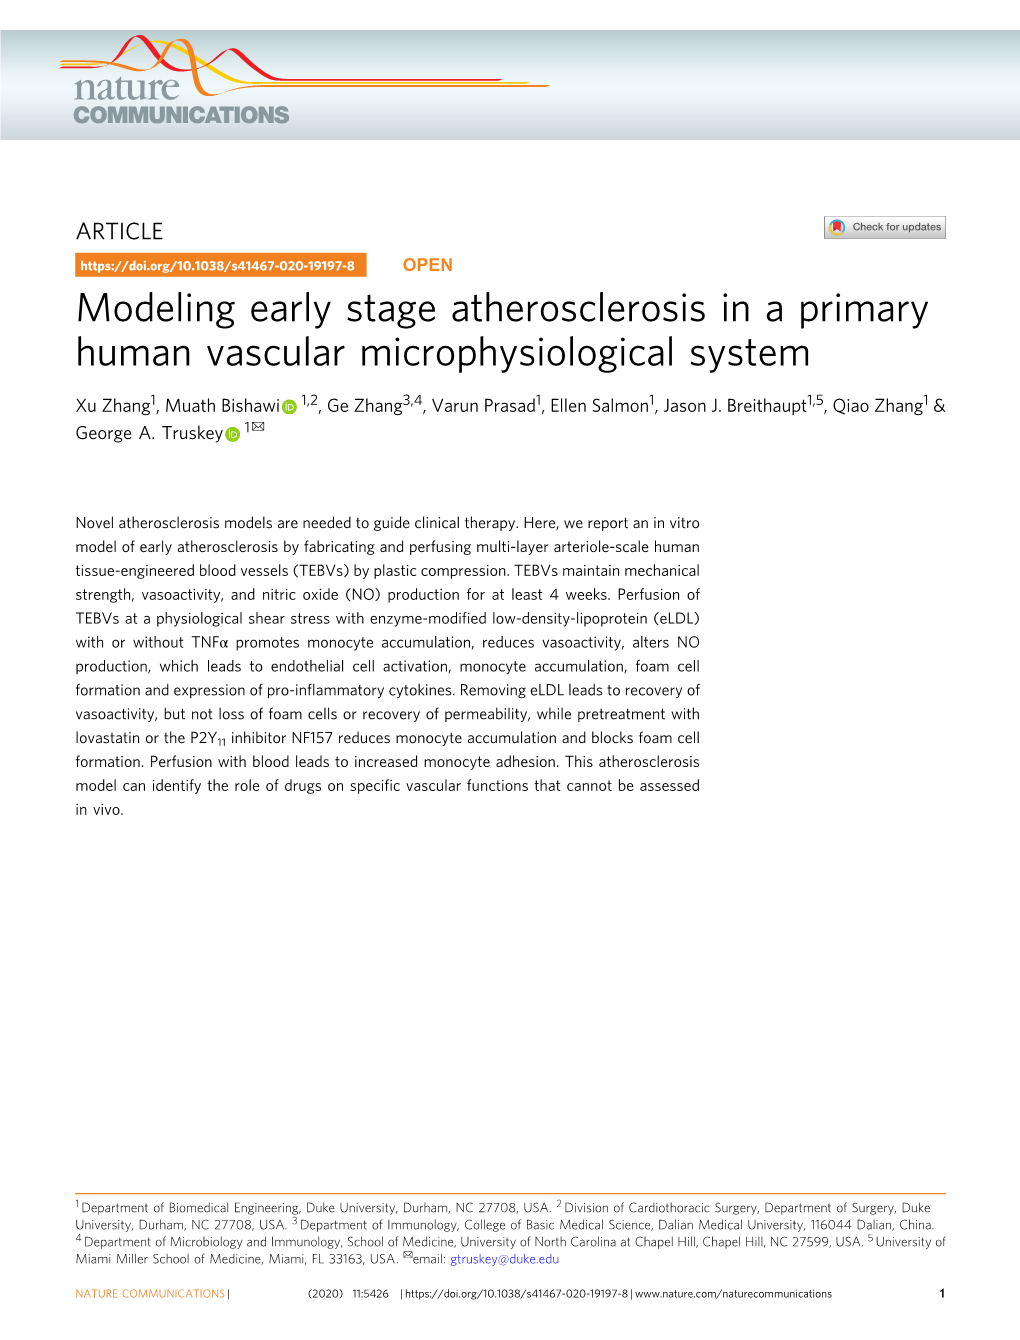 Modeling Early Stage Atherosclerosis in a Primary Human Vascular Microphysiological System